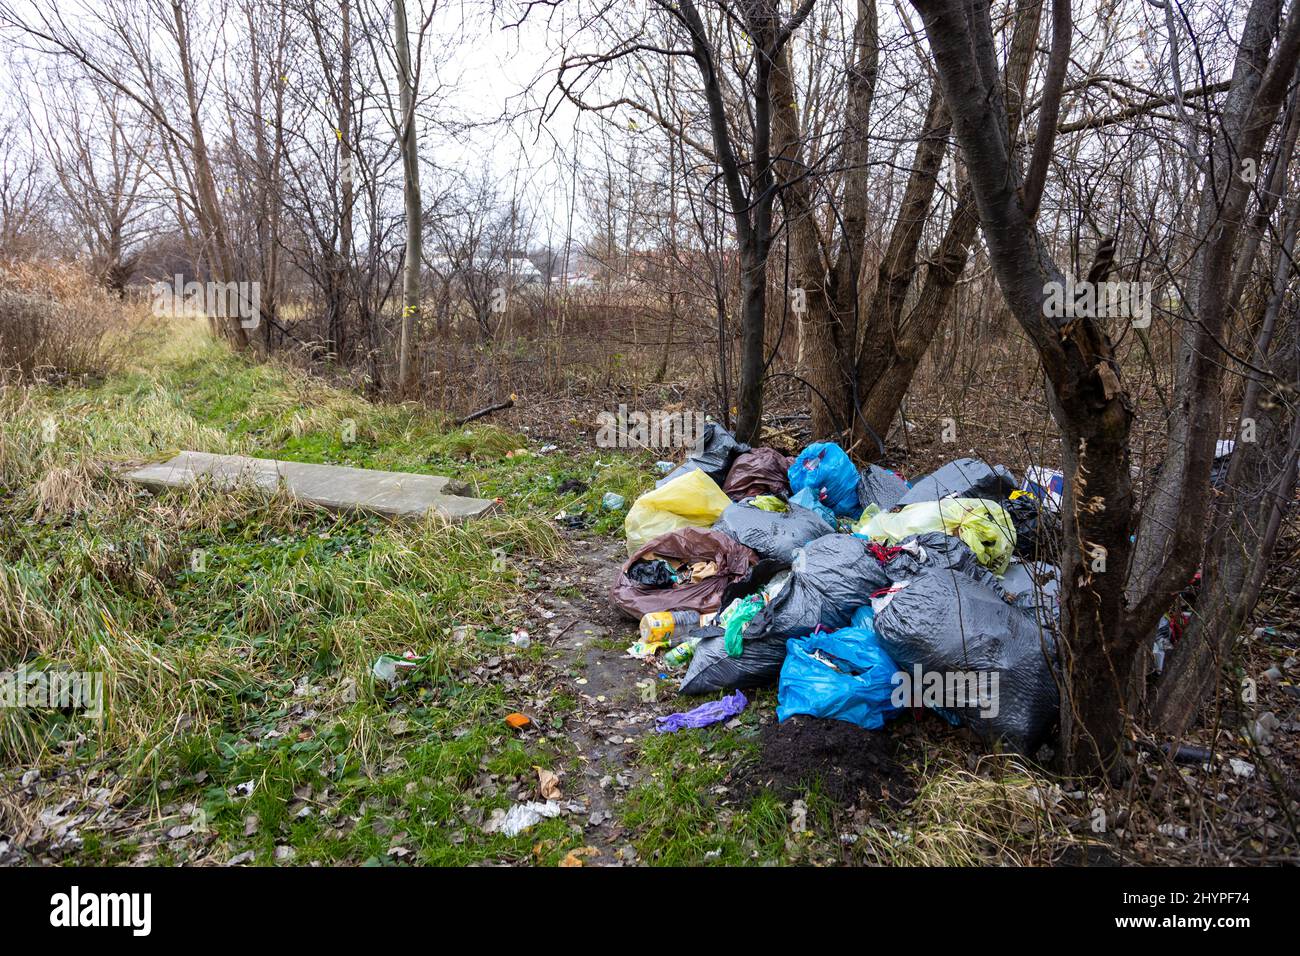 https://c8.alamy.com/comp/2HYPF74/illegal-garbage-dump-in-the-forest-rubbish-in-the-forest-picture-taken-in-the-cloudy-day-natural-light-conditions-2HYPF74.jpg